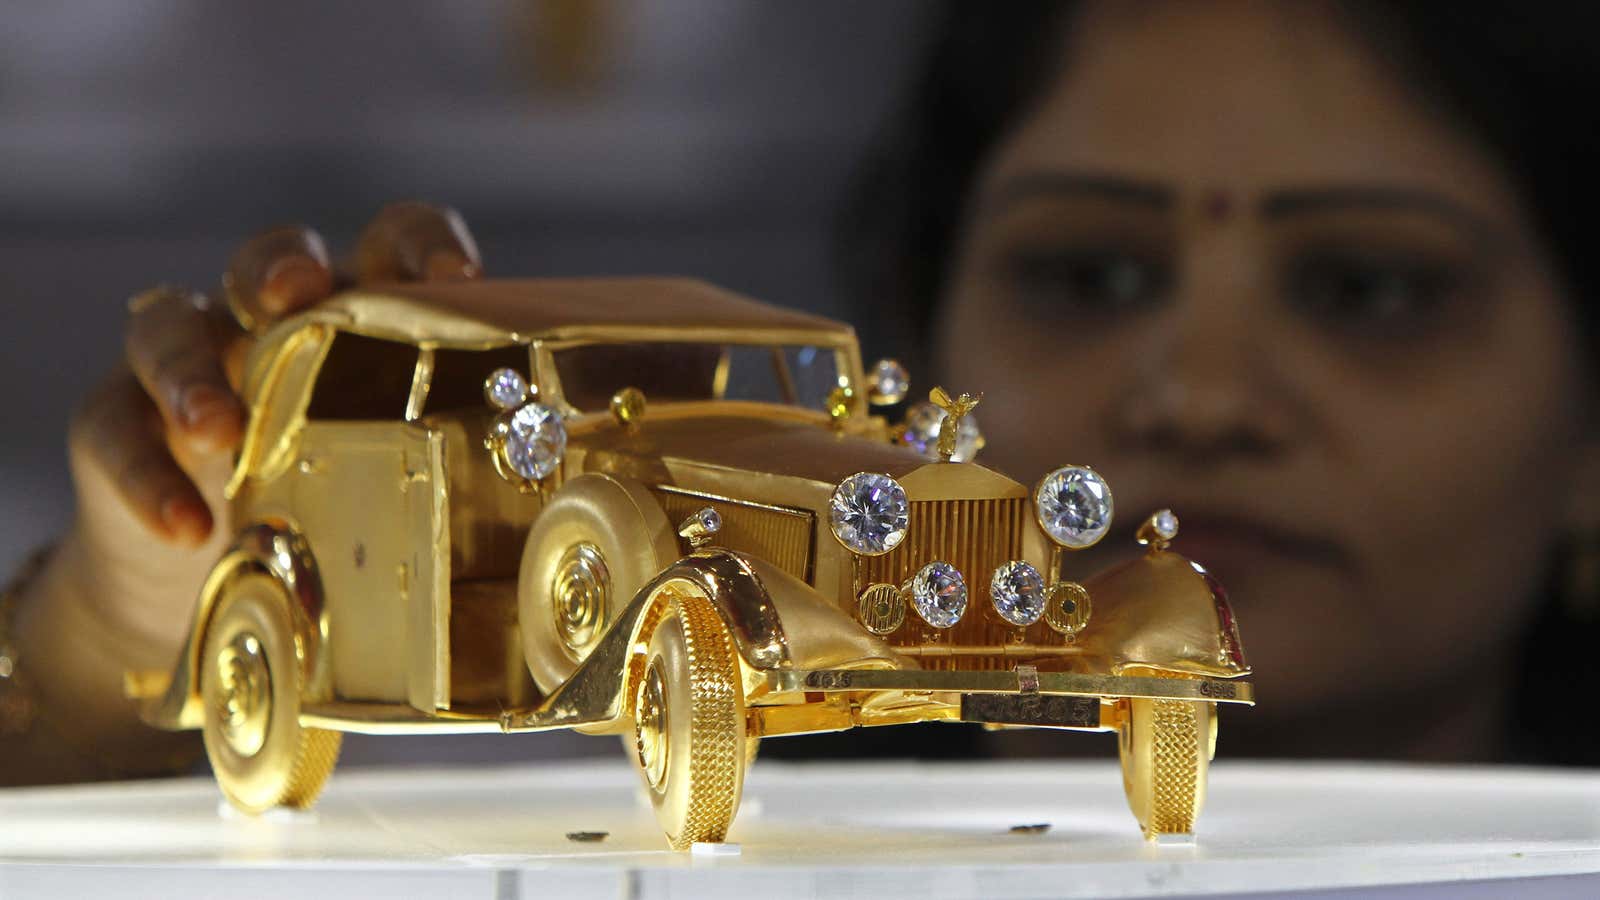 A woman looks at a Rolls Royce “RRR65” car model made from pure gold weighing 1.5 kg (3 lbs), displayed at the “Gem and Jewellery…